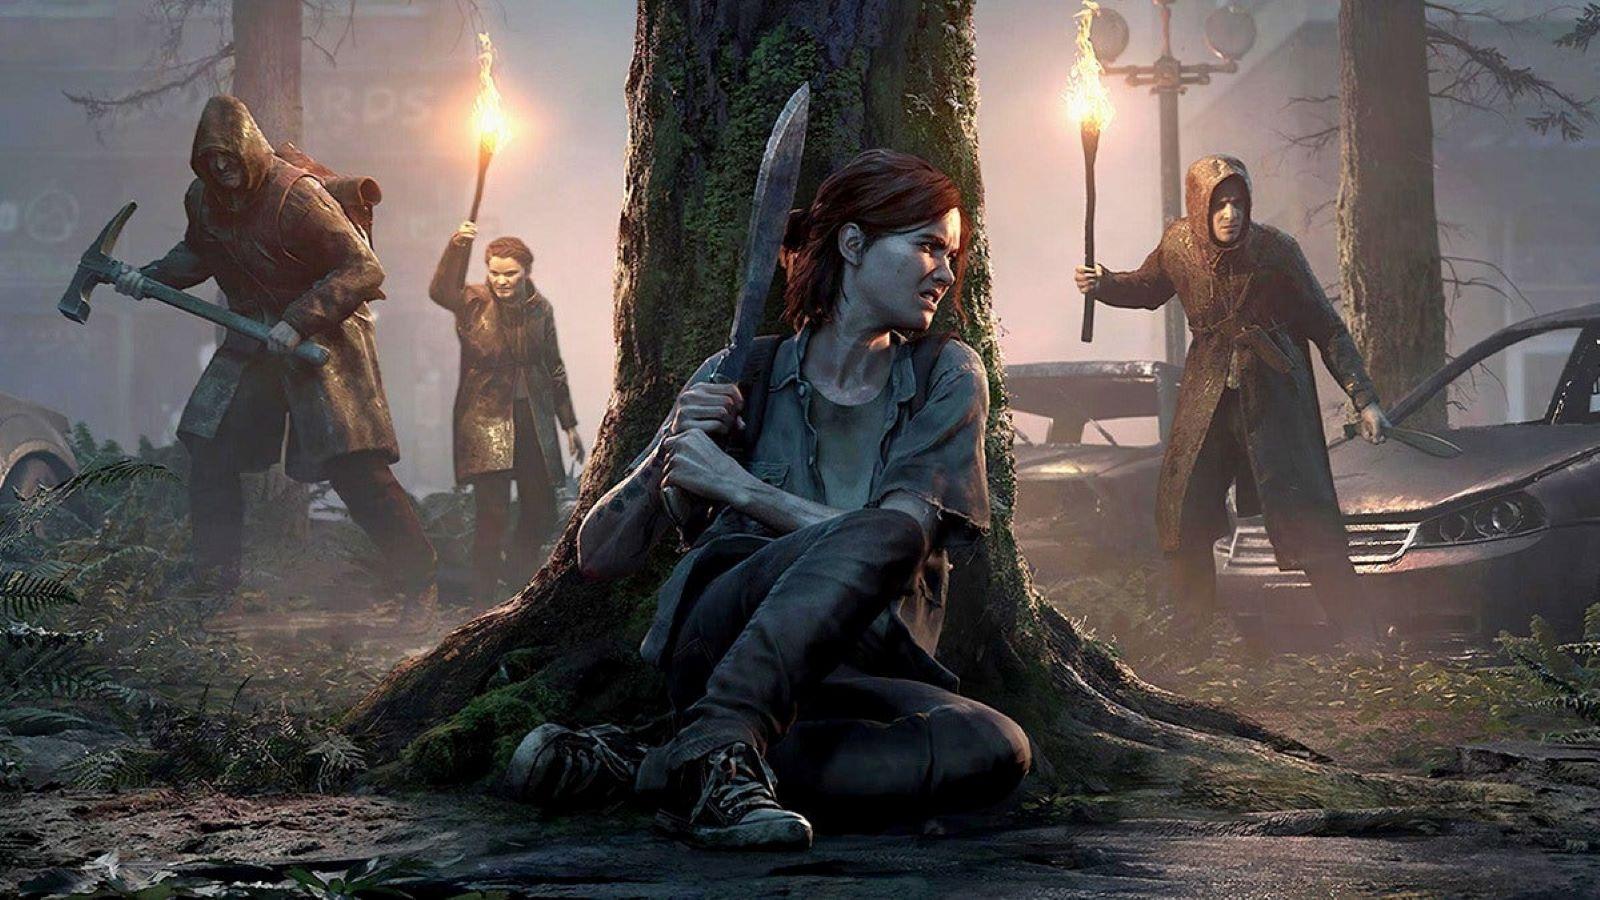 The Last of Us: Part 2 Game Will Get Season 2 and More for Its Story